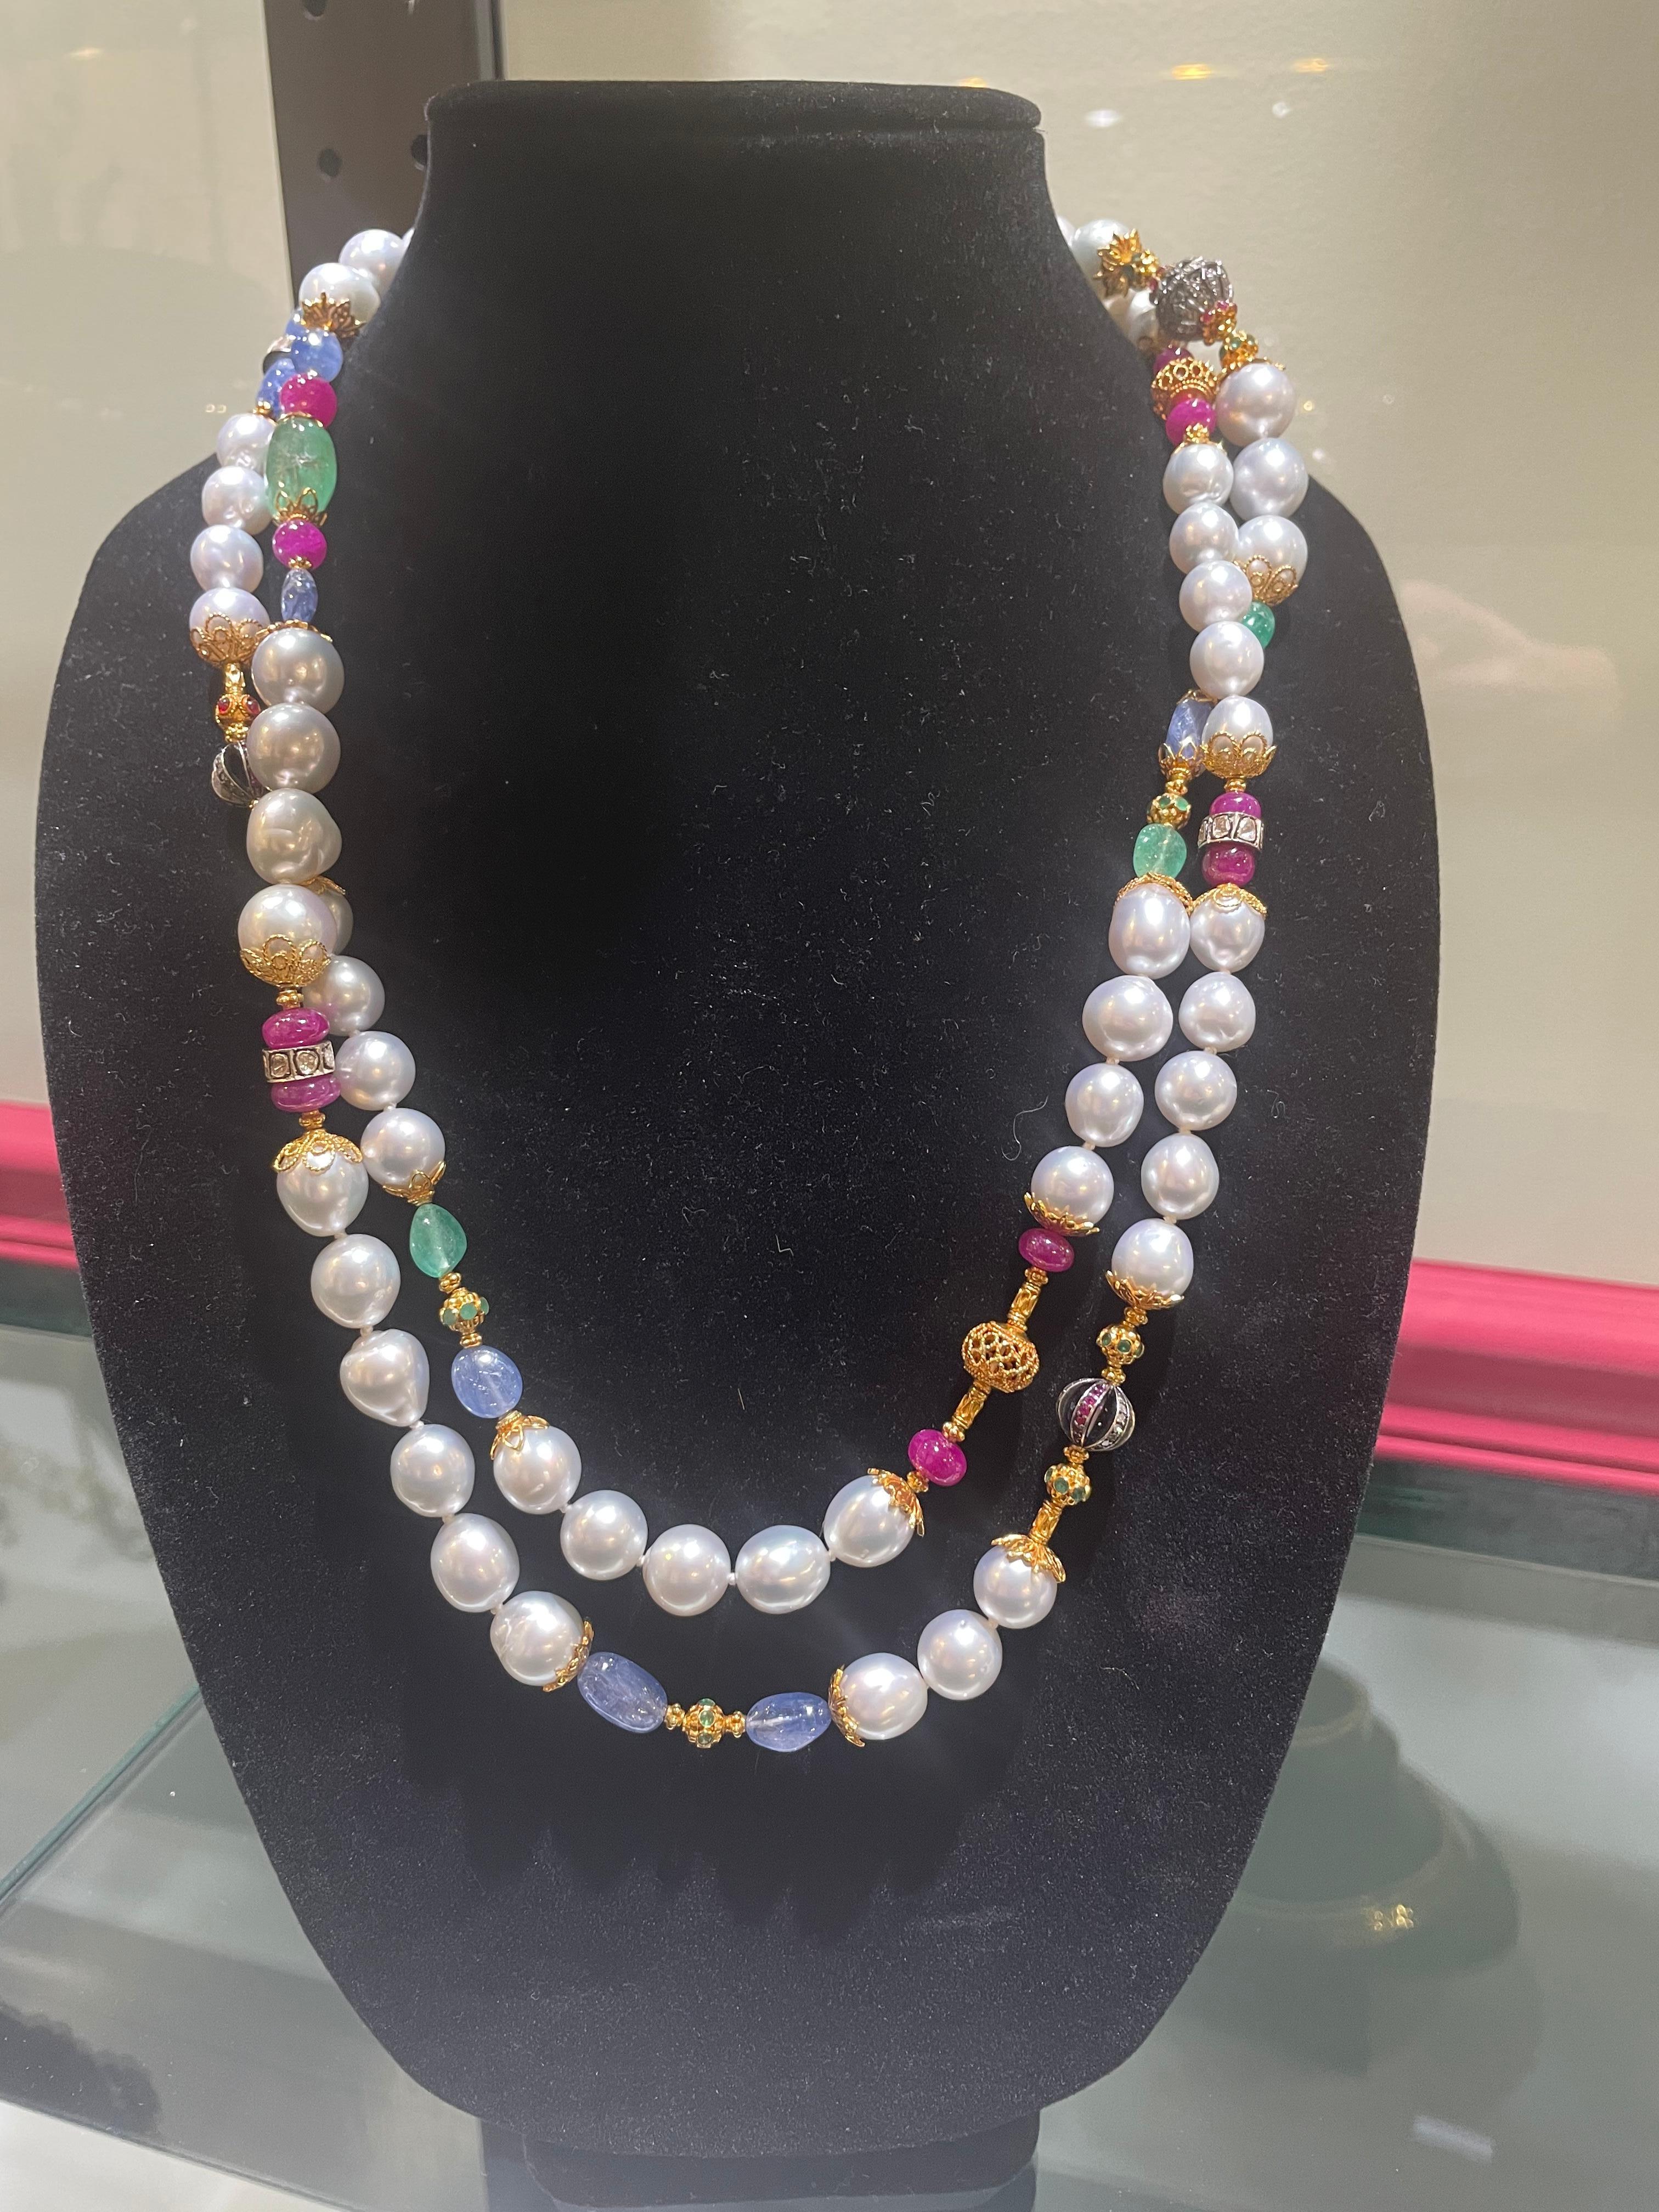 Incredible Verdura necklace designed in the most beautiful style using south sea pearls sapphires, emeralds, rubies and diamonds. Some of the gemstones are carved while others are cabochon style.
This is an exquisite necklace.